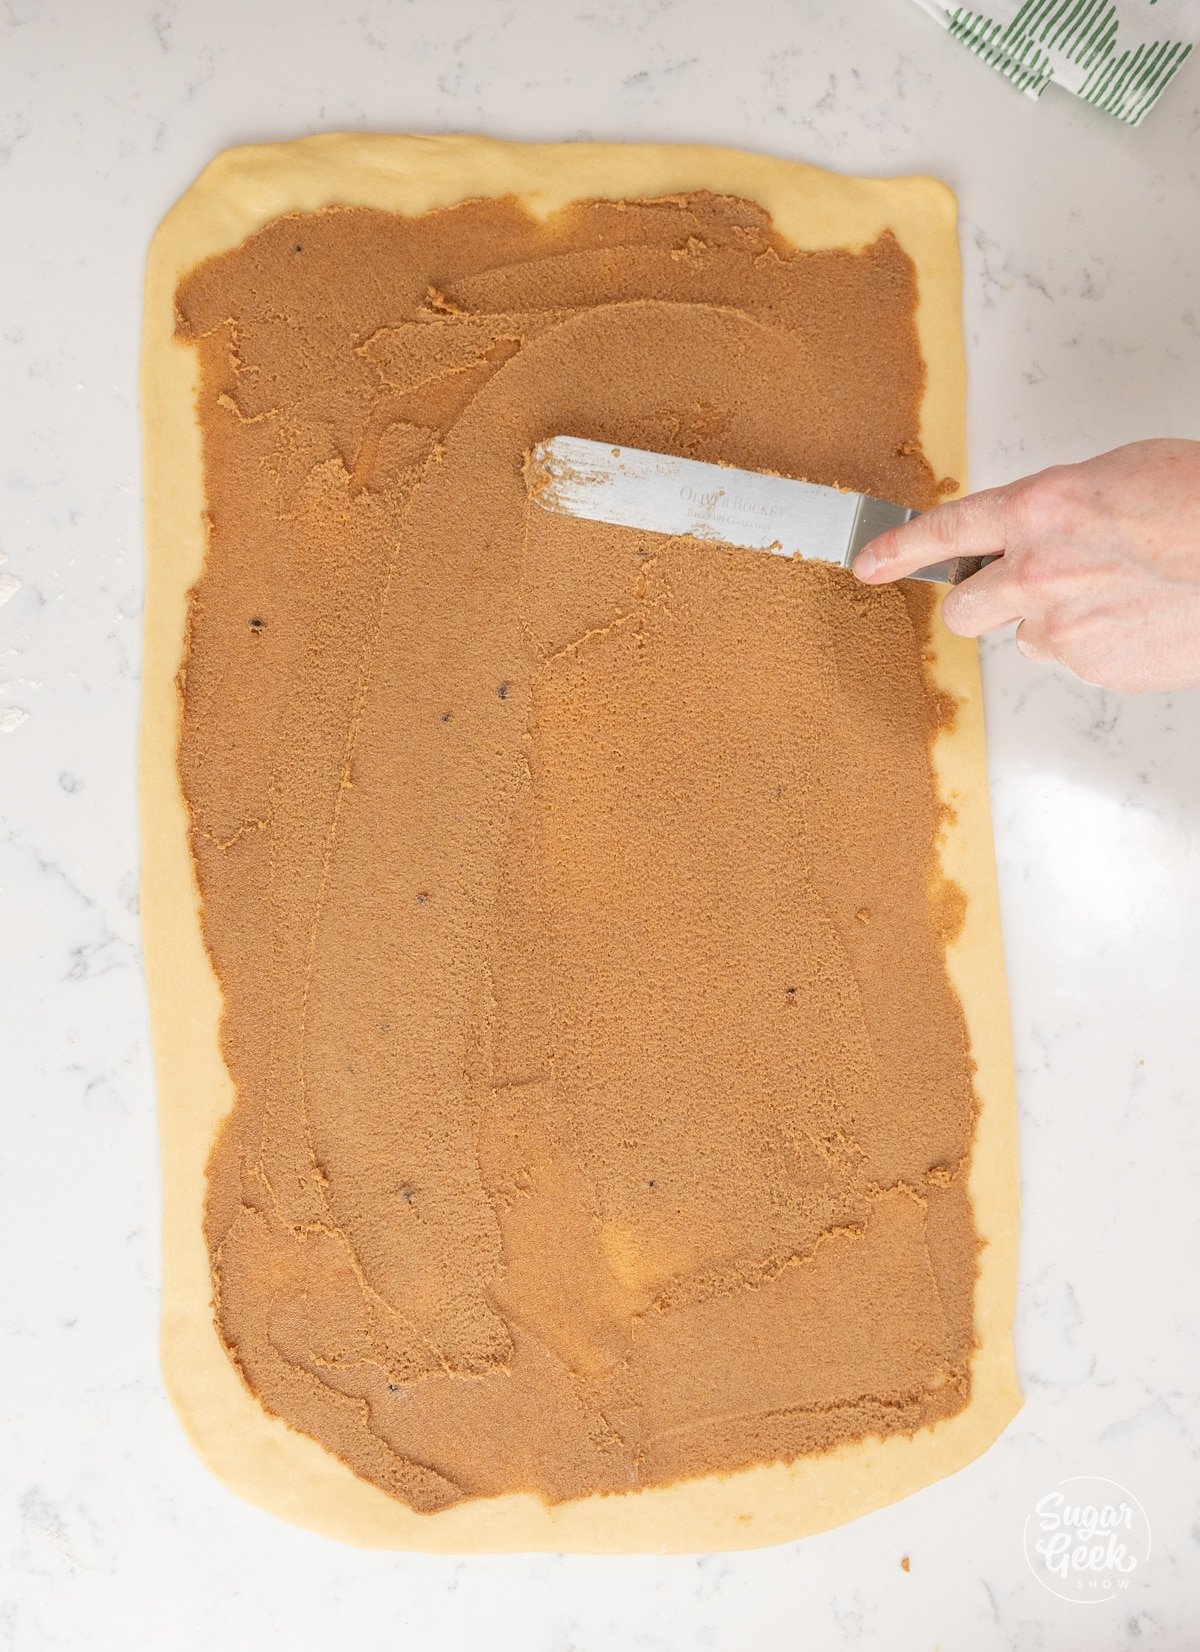 hand spreading cinnamon filling onto dough with an offset spatula